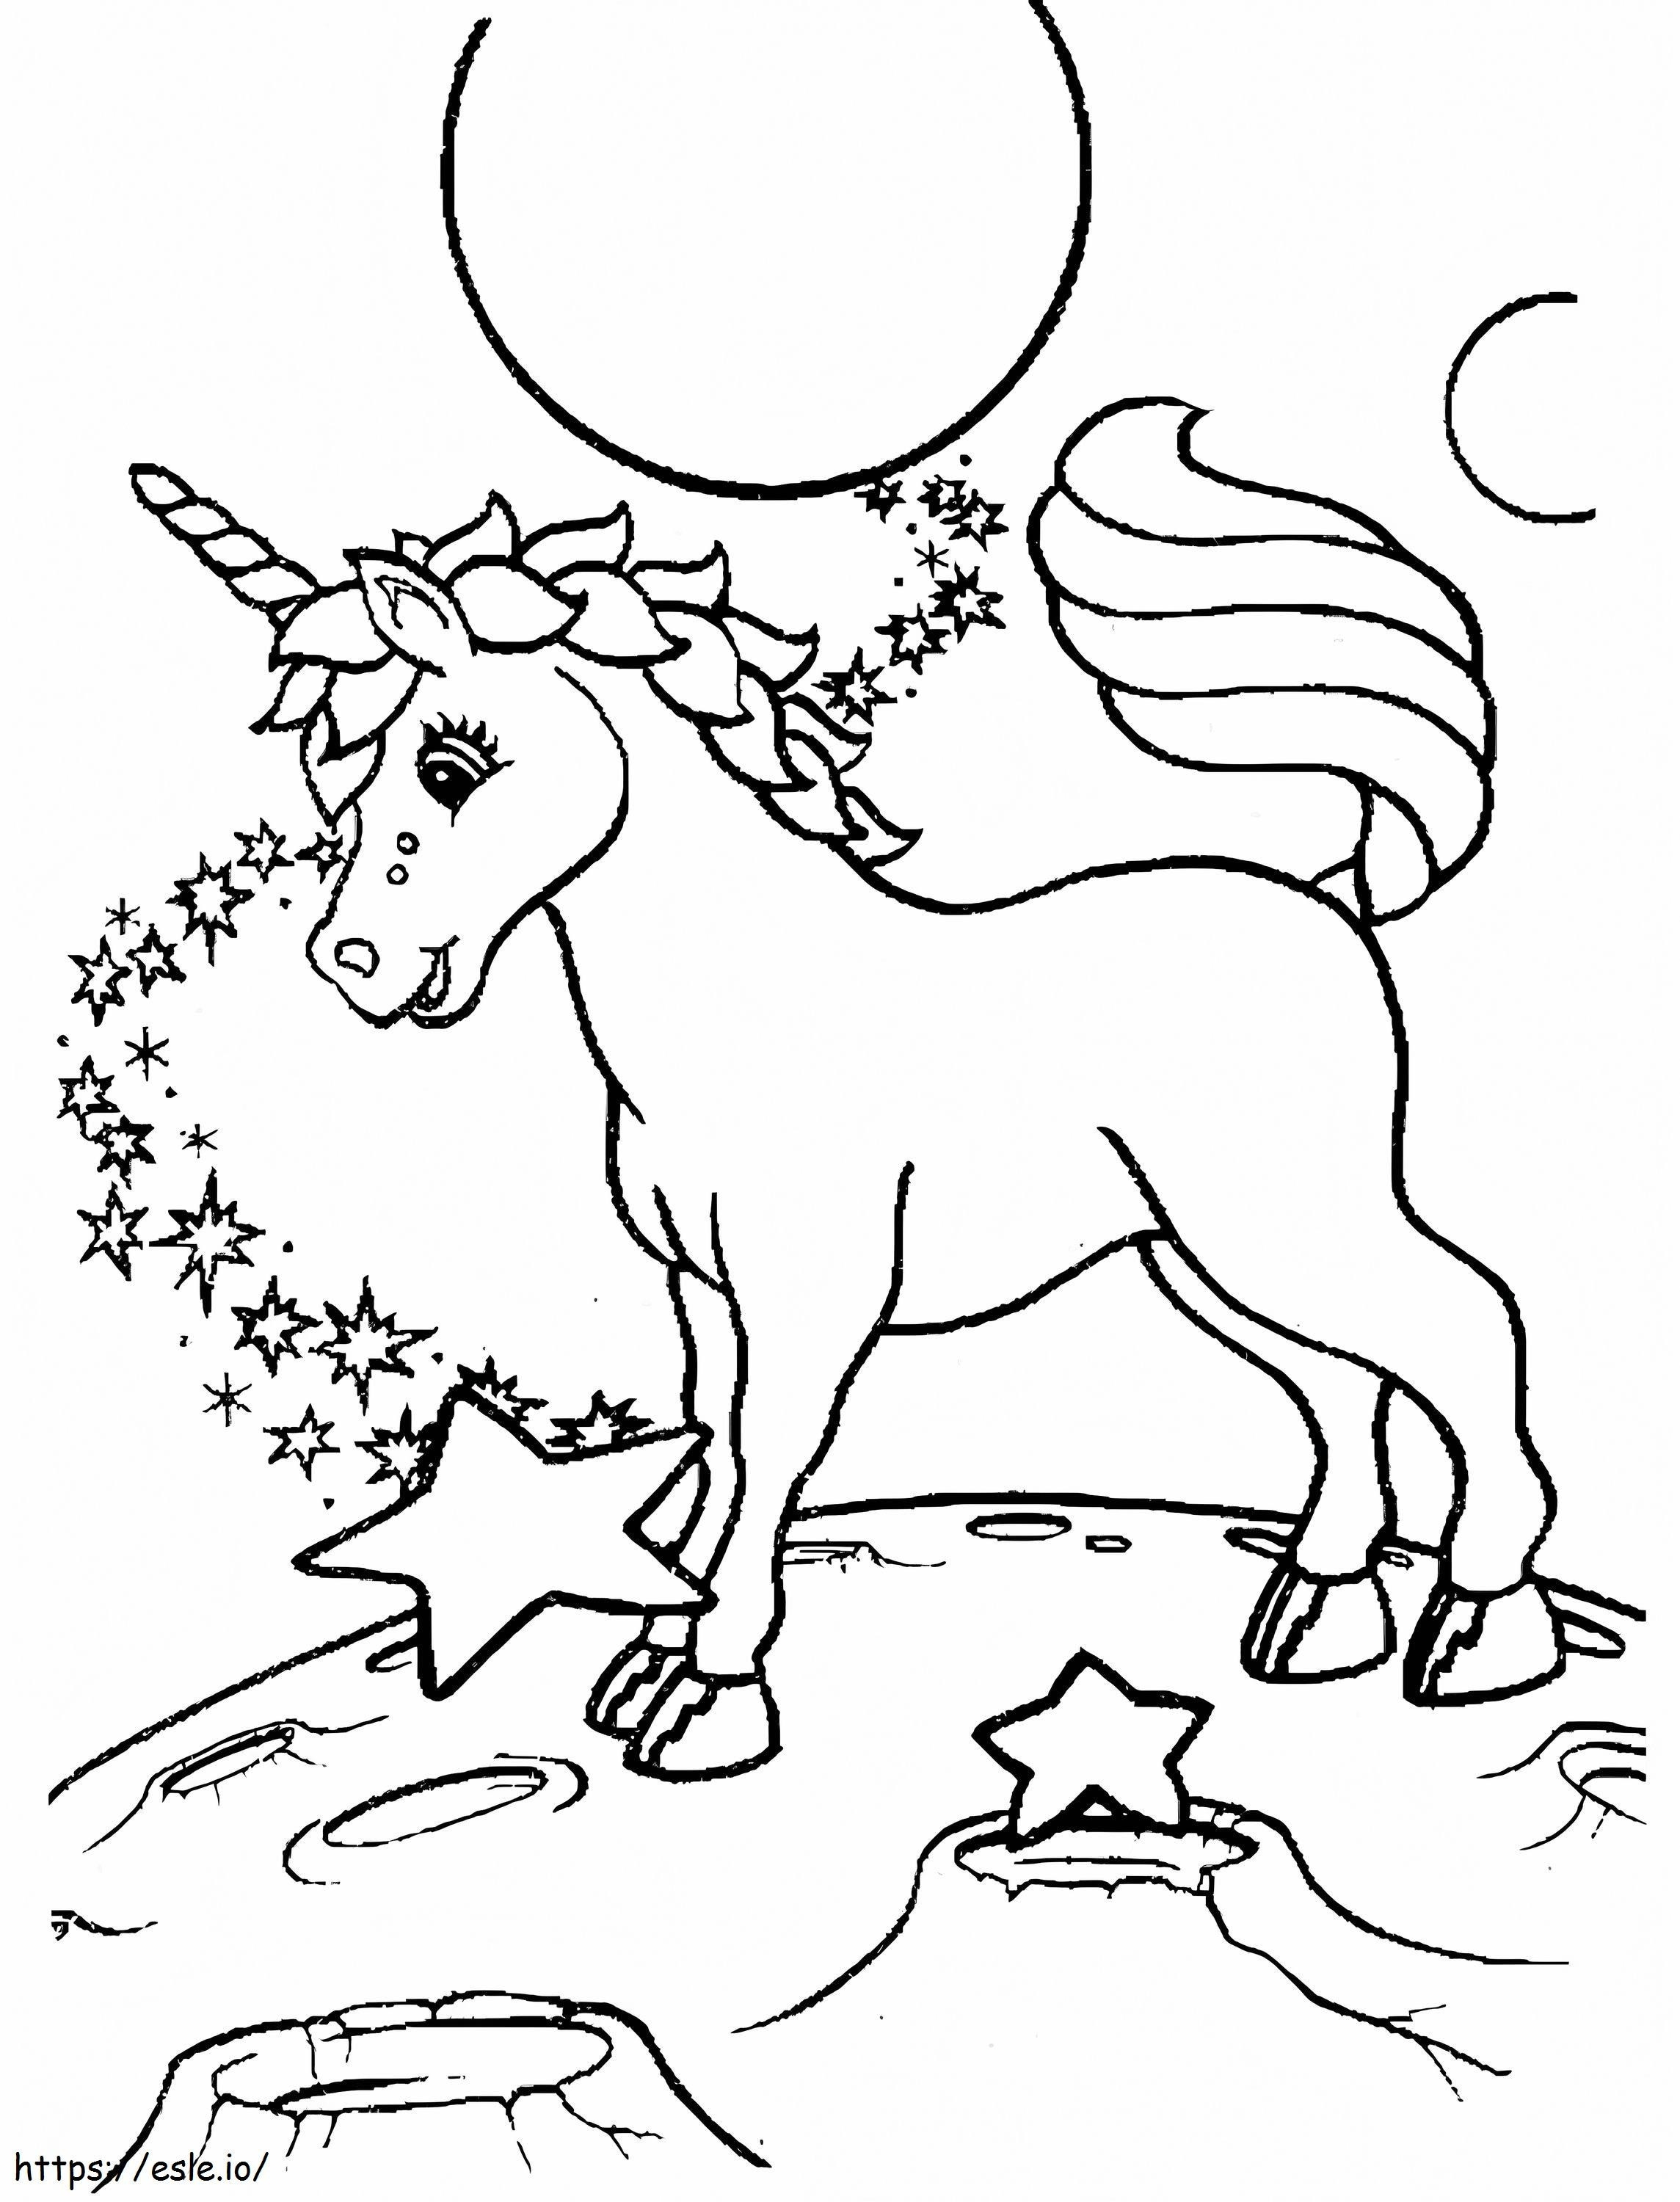 Unicorn In Lisa Frank A4 coloring page